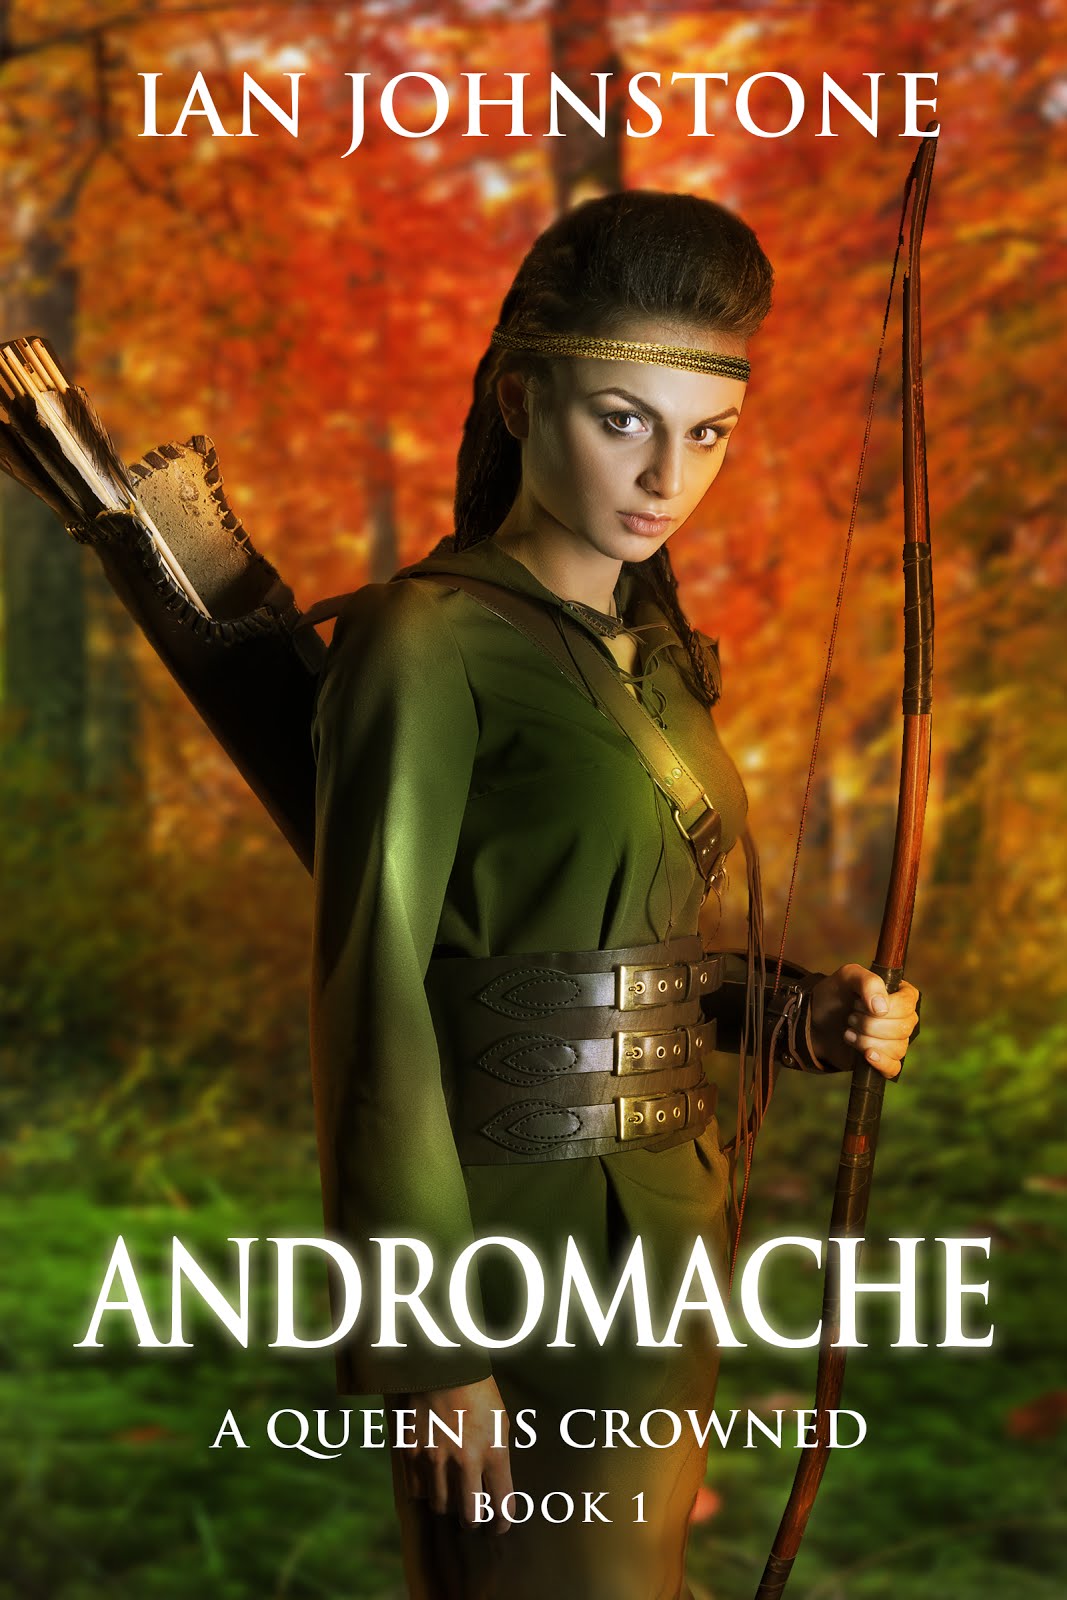 ANDROMACHE [A Queen is Crowned][1]